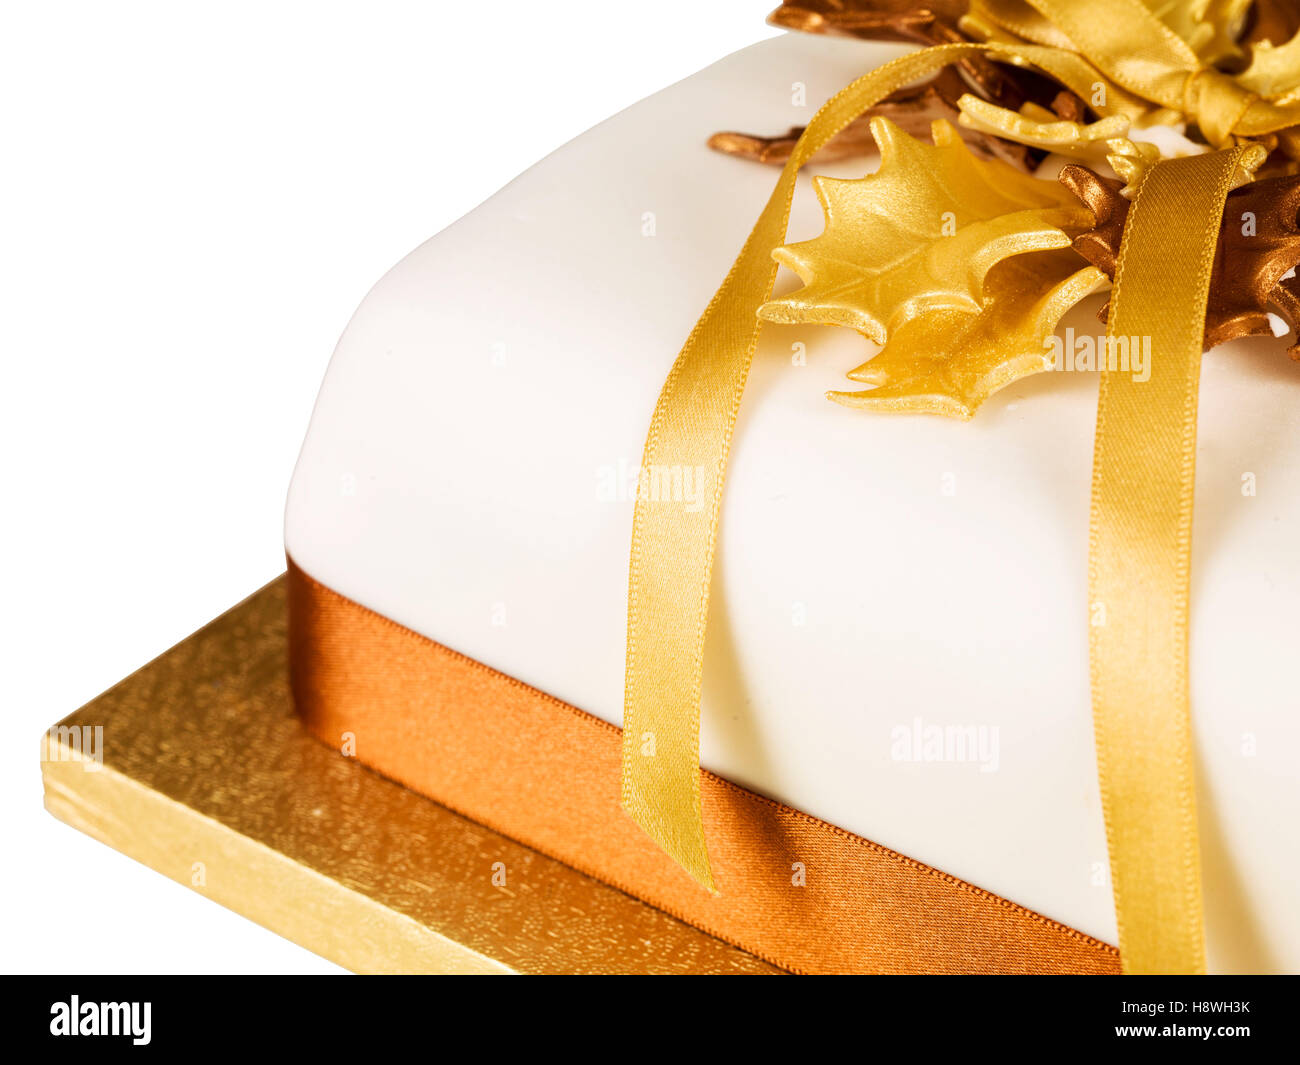 Traditional Authentic Iced and Decorated Rich Fruit Christmas Cake With Gold Ribbons And Holly On A Cake Board With No People Ready To Eat Stock Photo